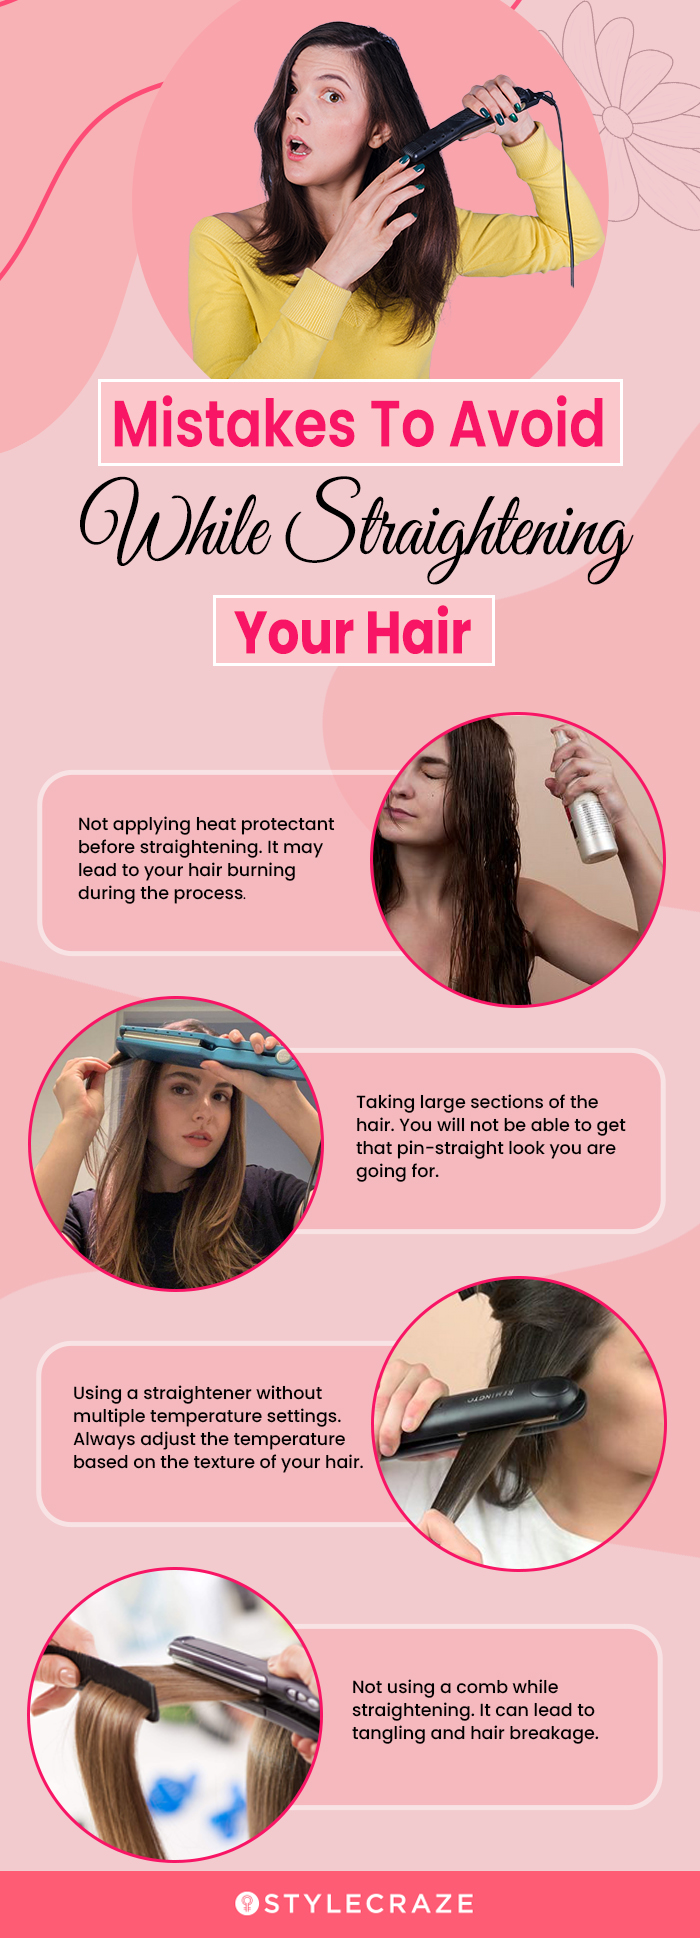 7 things I wish I knew before permanently straightening my hair